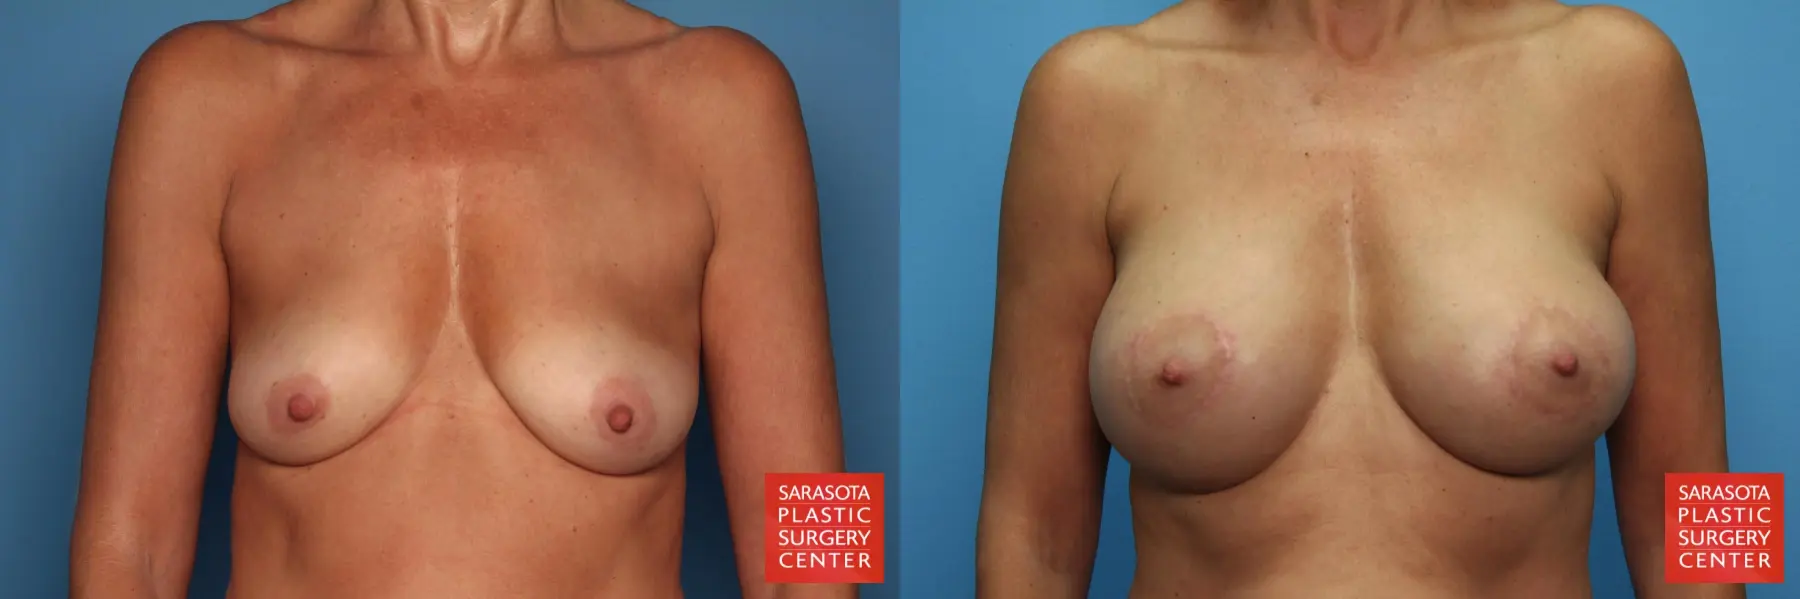 Breast Augmentation With Lift: Patient 5 - Before and After 1